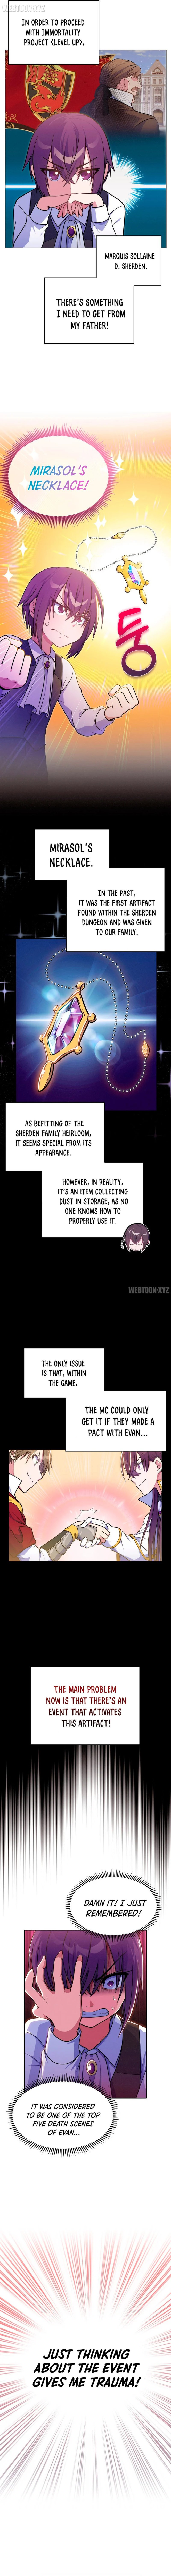 never-die-extra-chap-3-7